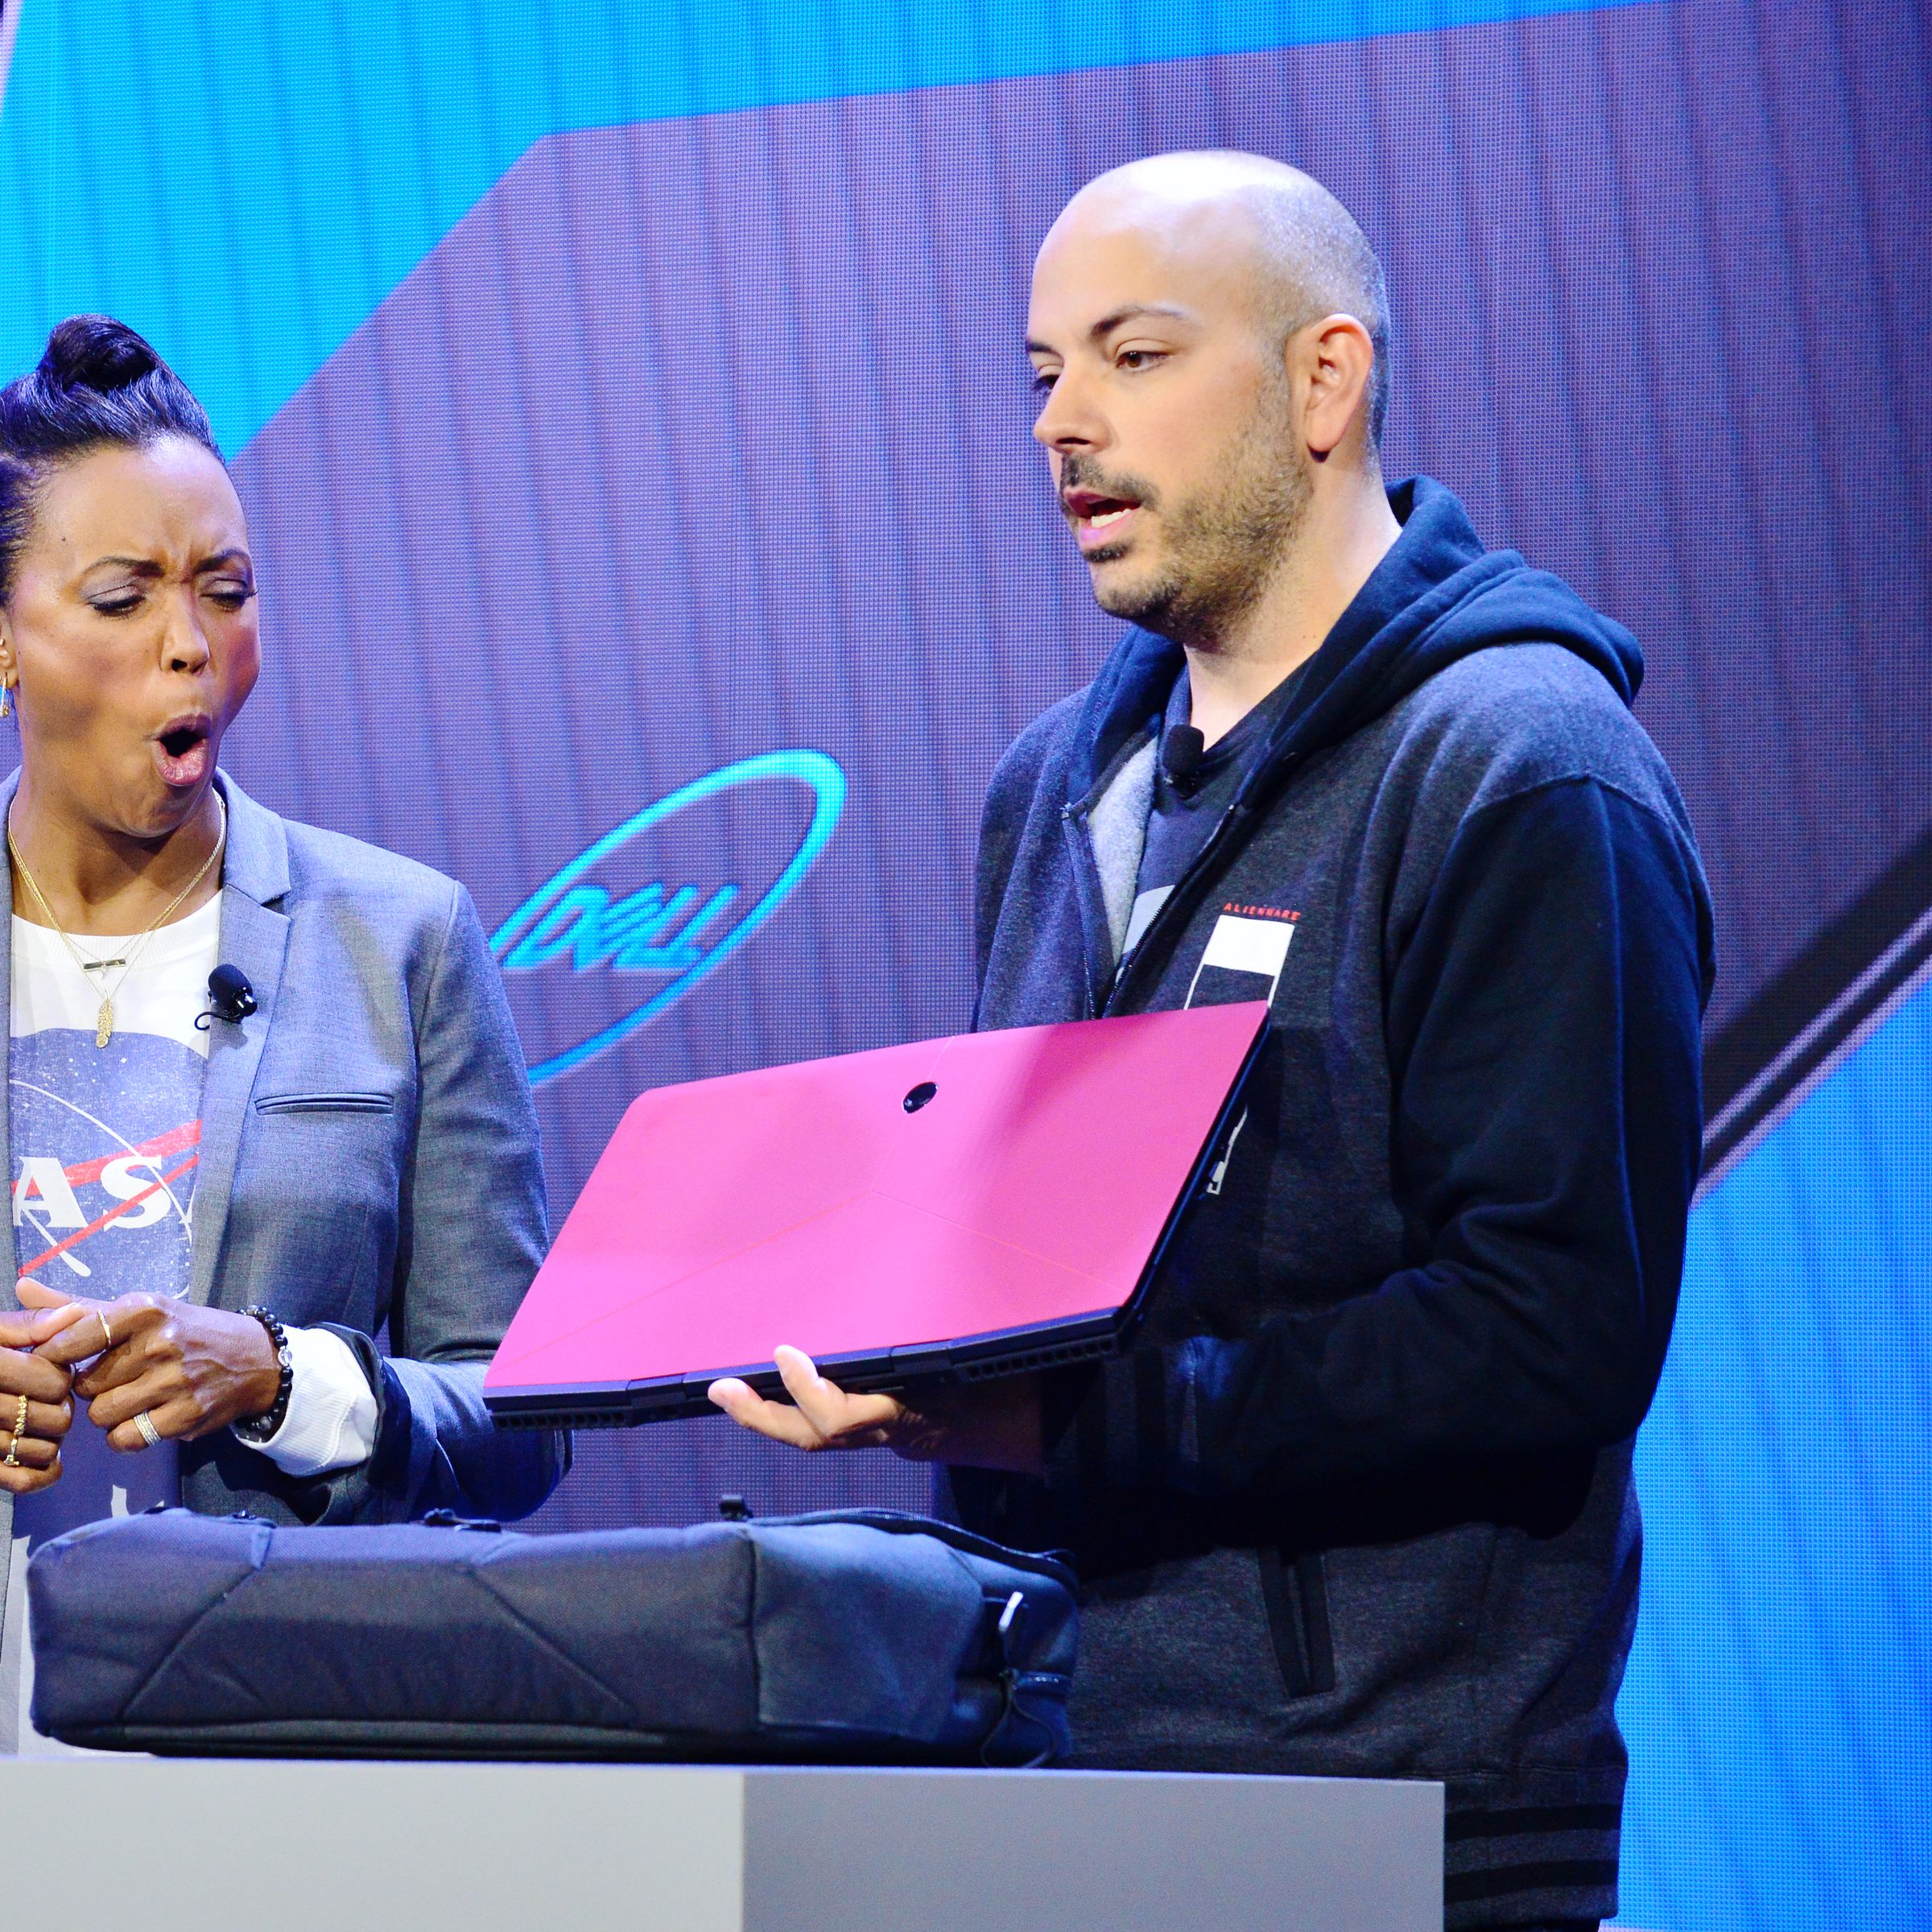 Actress And Director Aisha Tyler Join #DellExperience At CES 2019